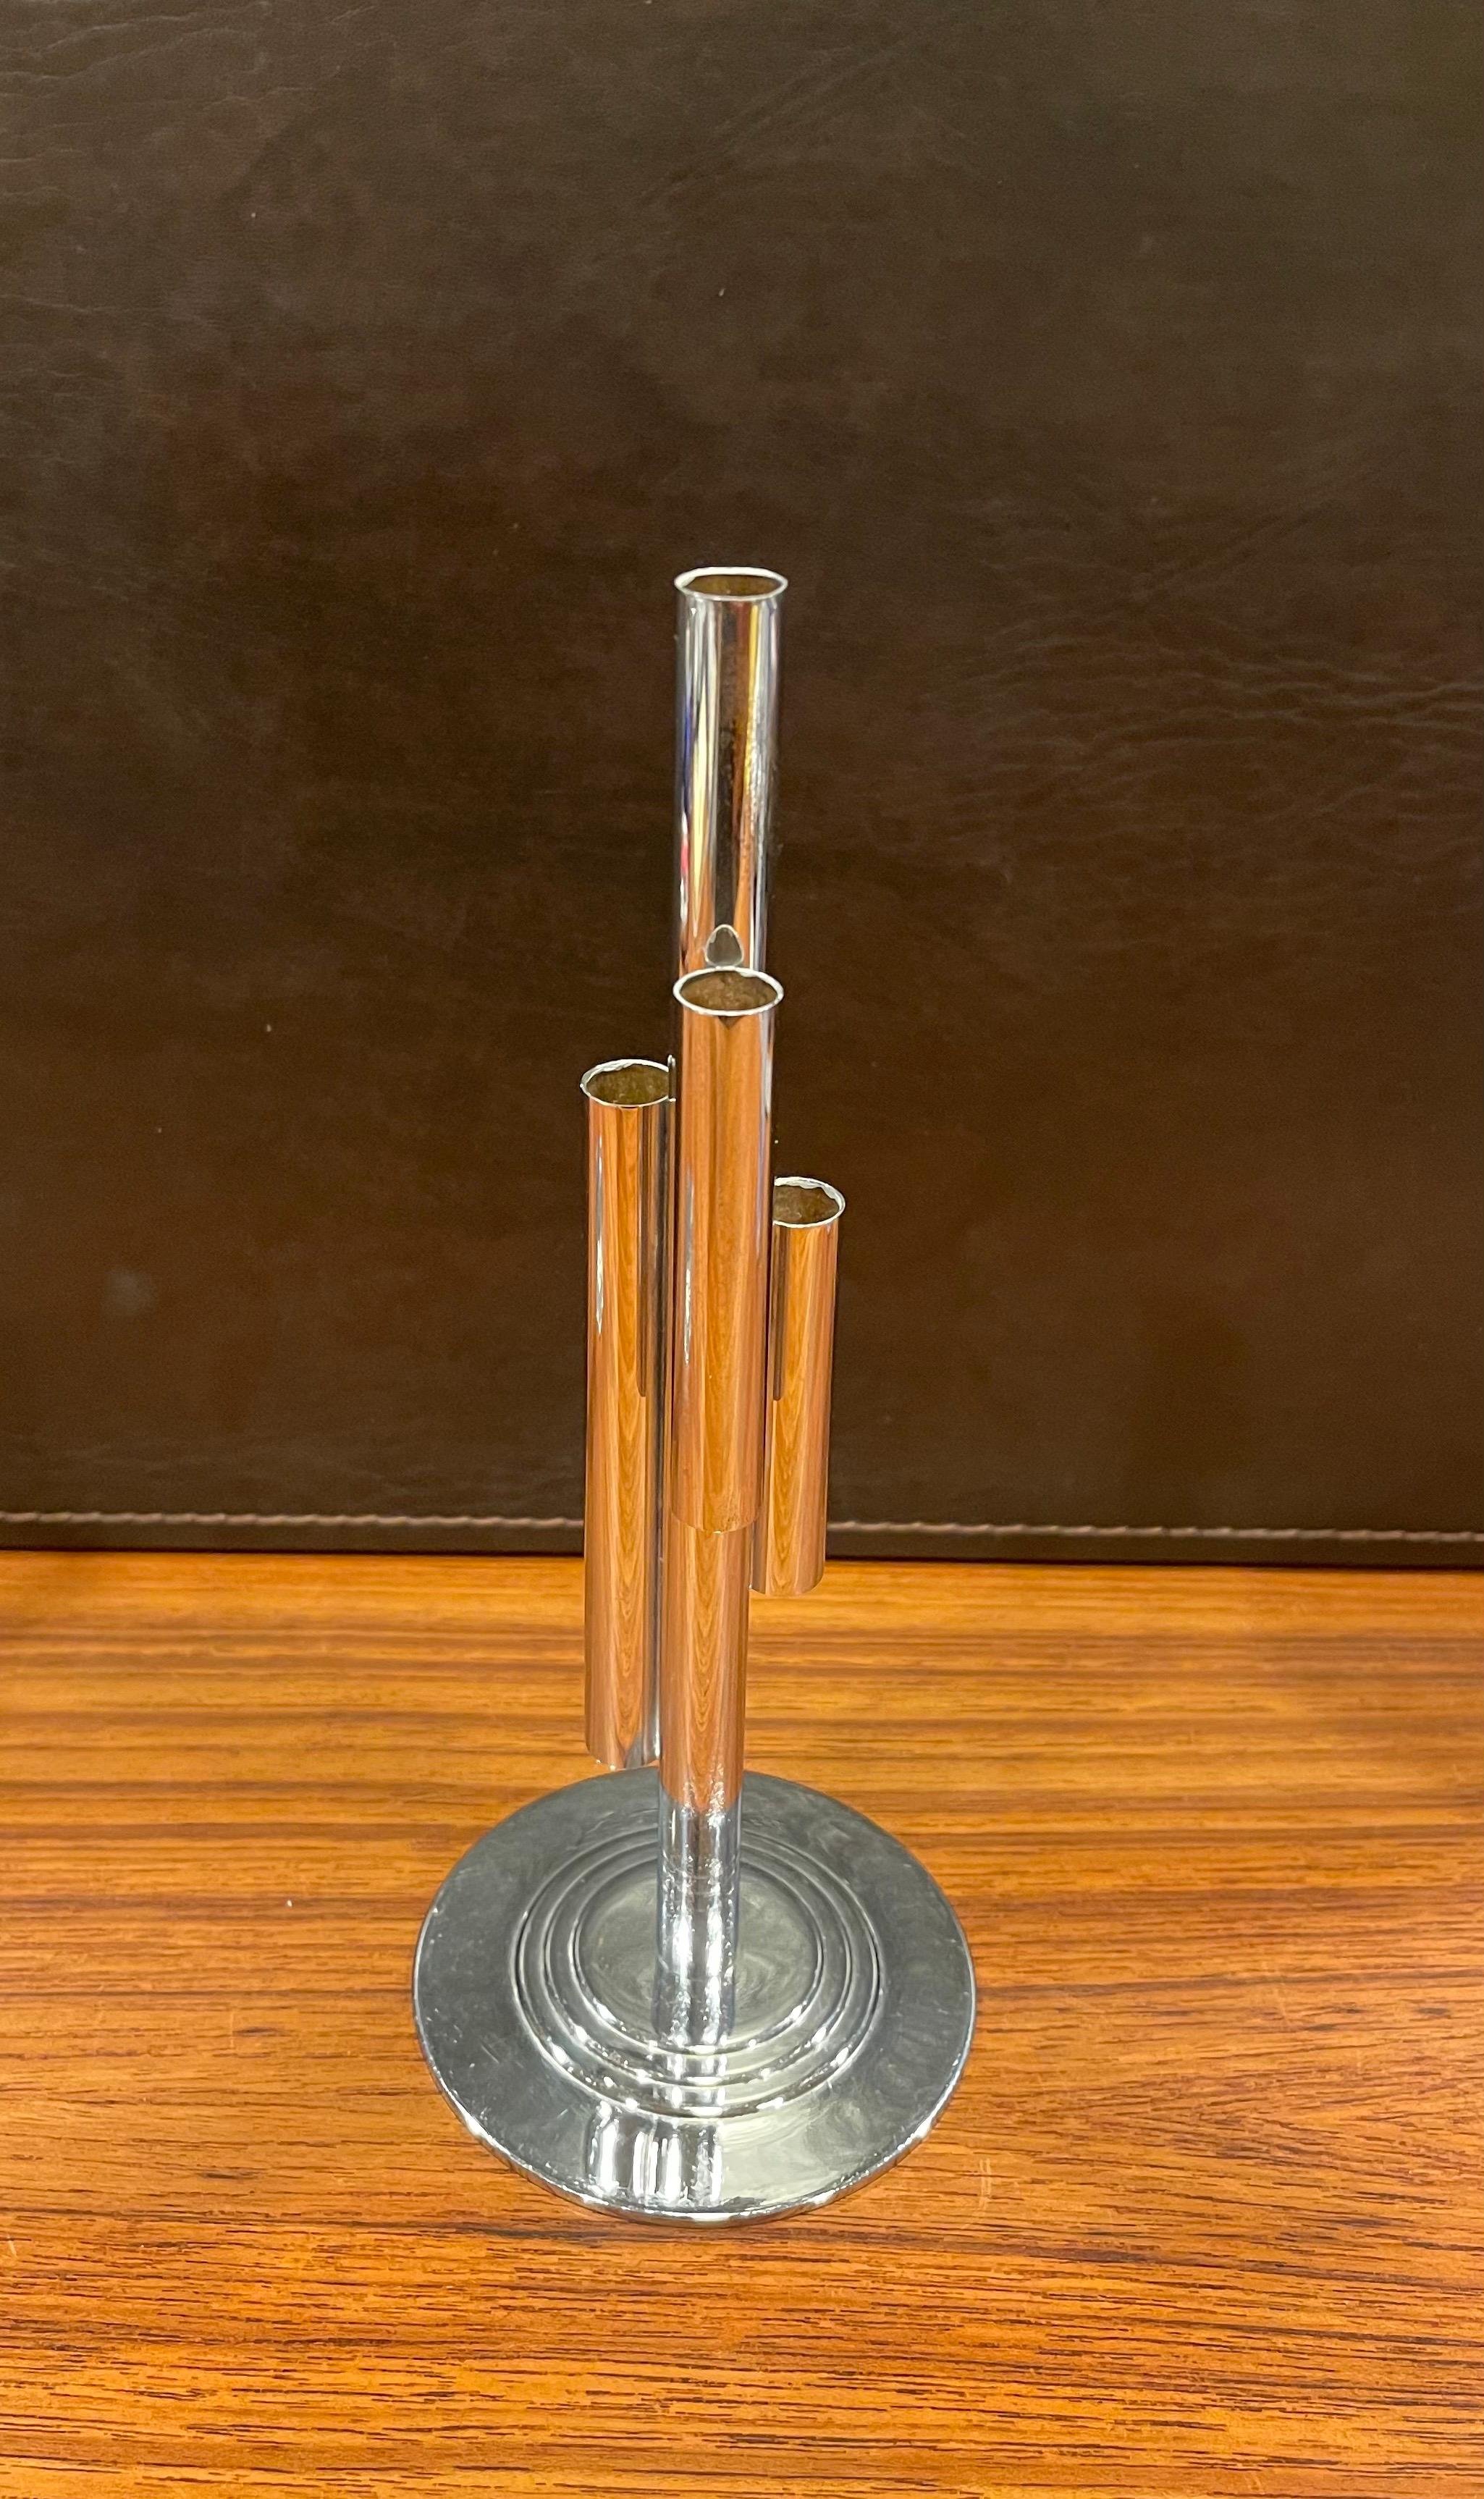 Wonderful Art Deco tubular chrome bud vase by Ruth & William Gerth for Chase & Co., circa 1930s. The design features a central chrome tube attached to which are three tubes of varying lengths and heights and mounted to a circular four stepped base.